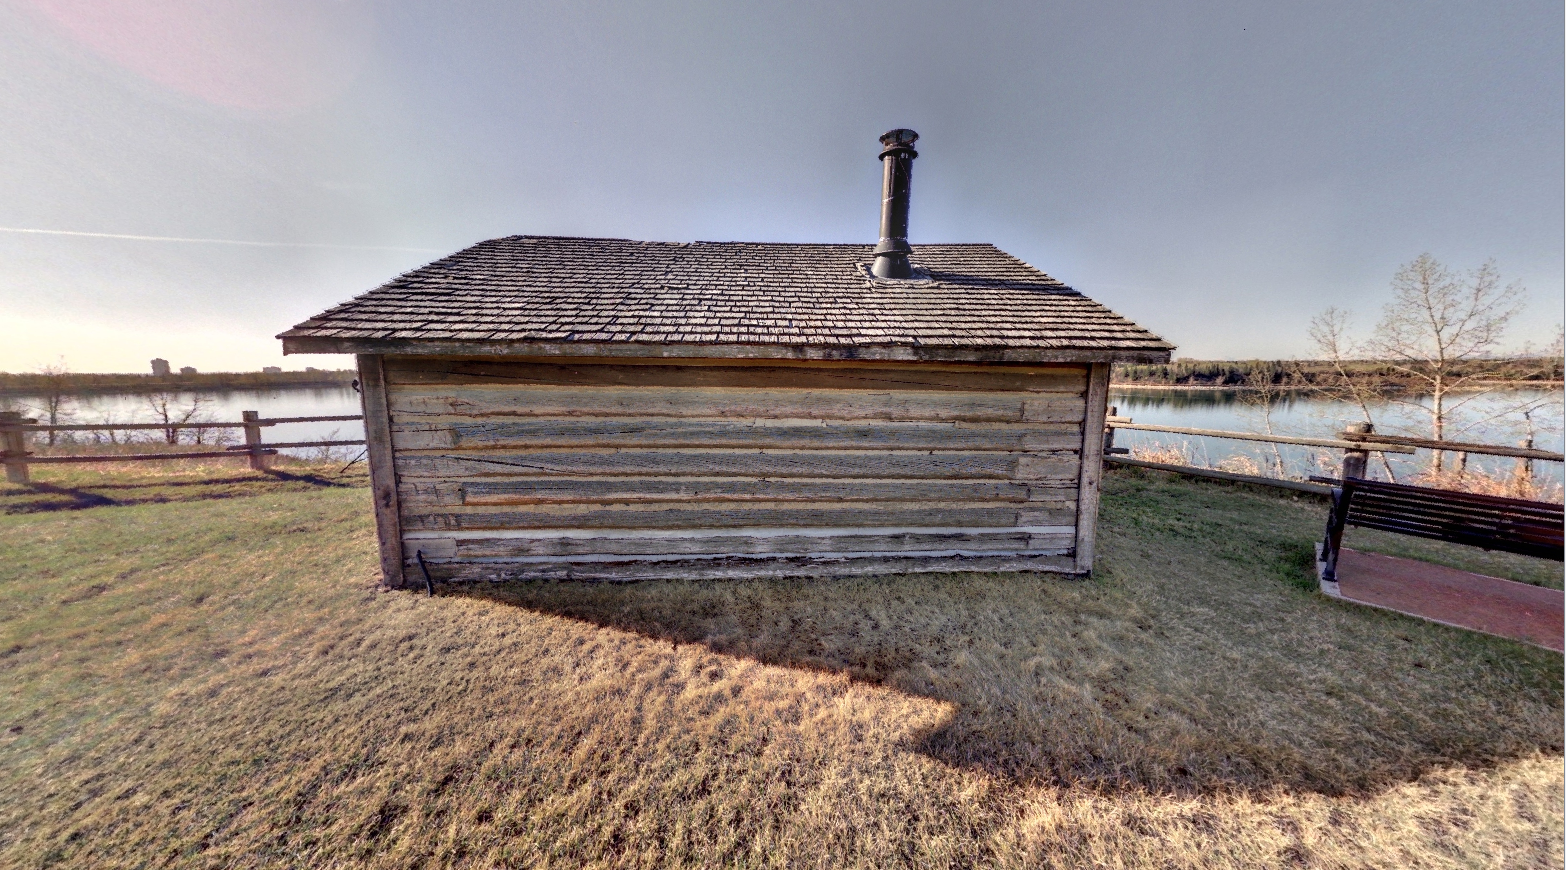 Panoramic view of the Miner's Cabin from Z+F 5010X laser scanner, scanning location 1